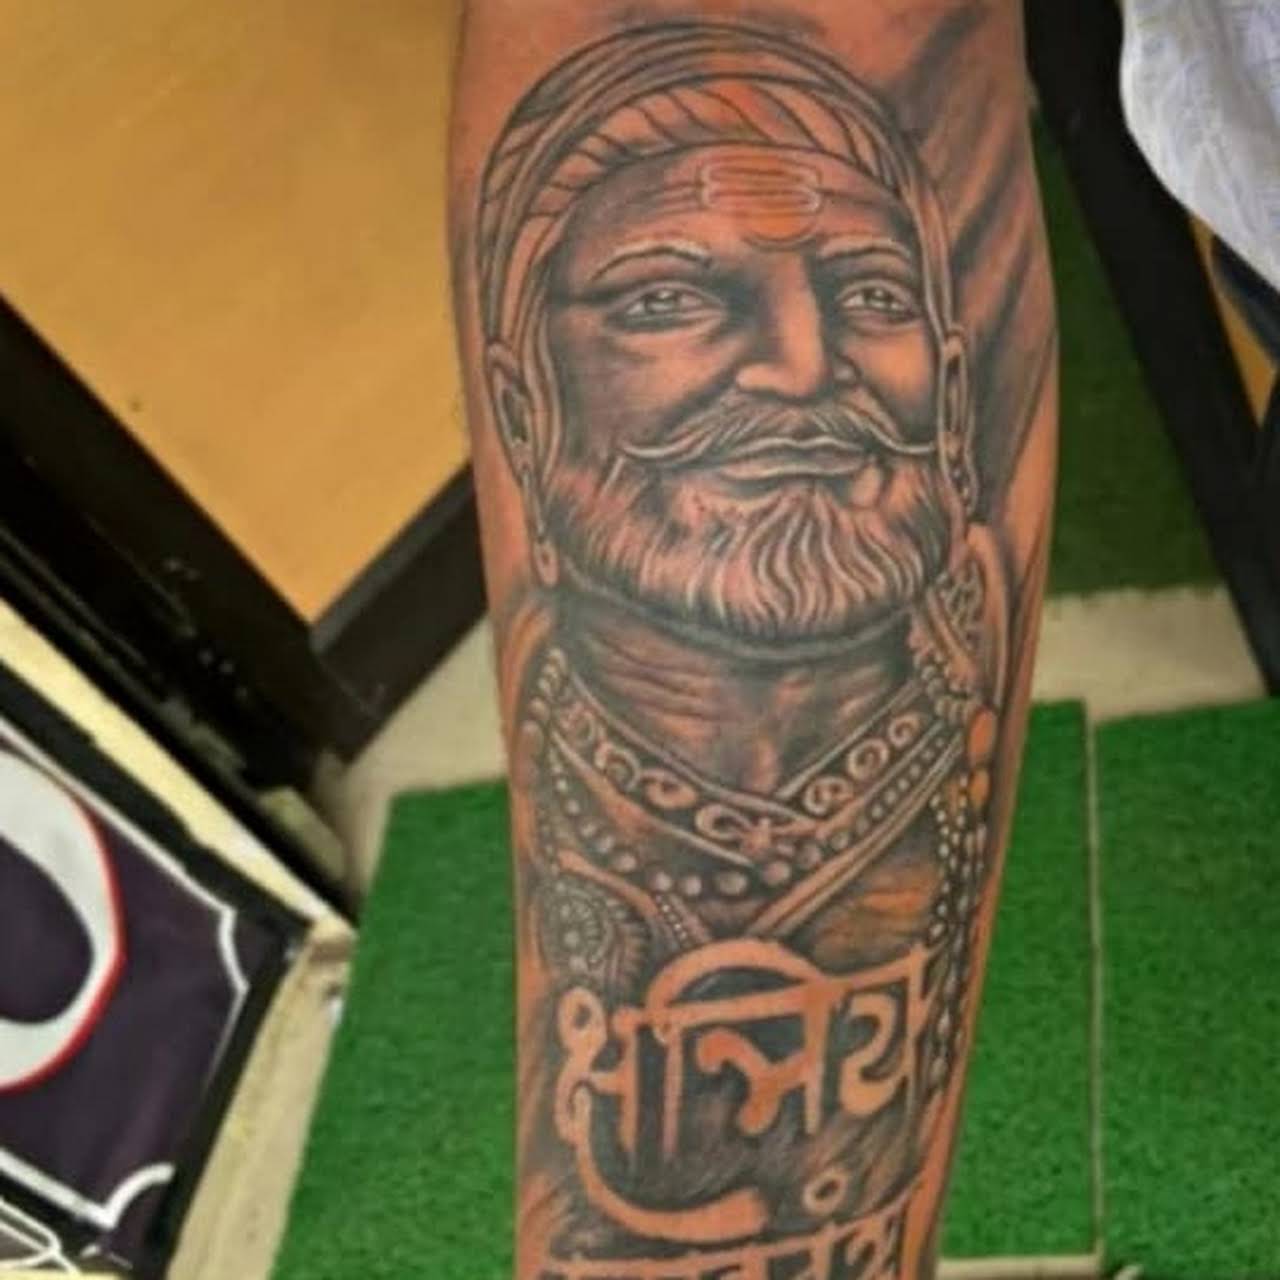 जय जिजाऊ. जय शिवराय | Cute profile pictures, Tattoos, Small lion tattoo